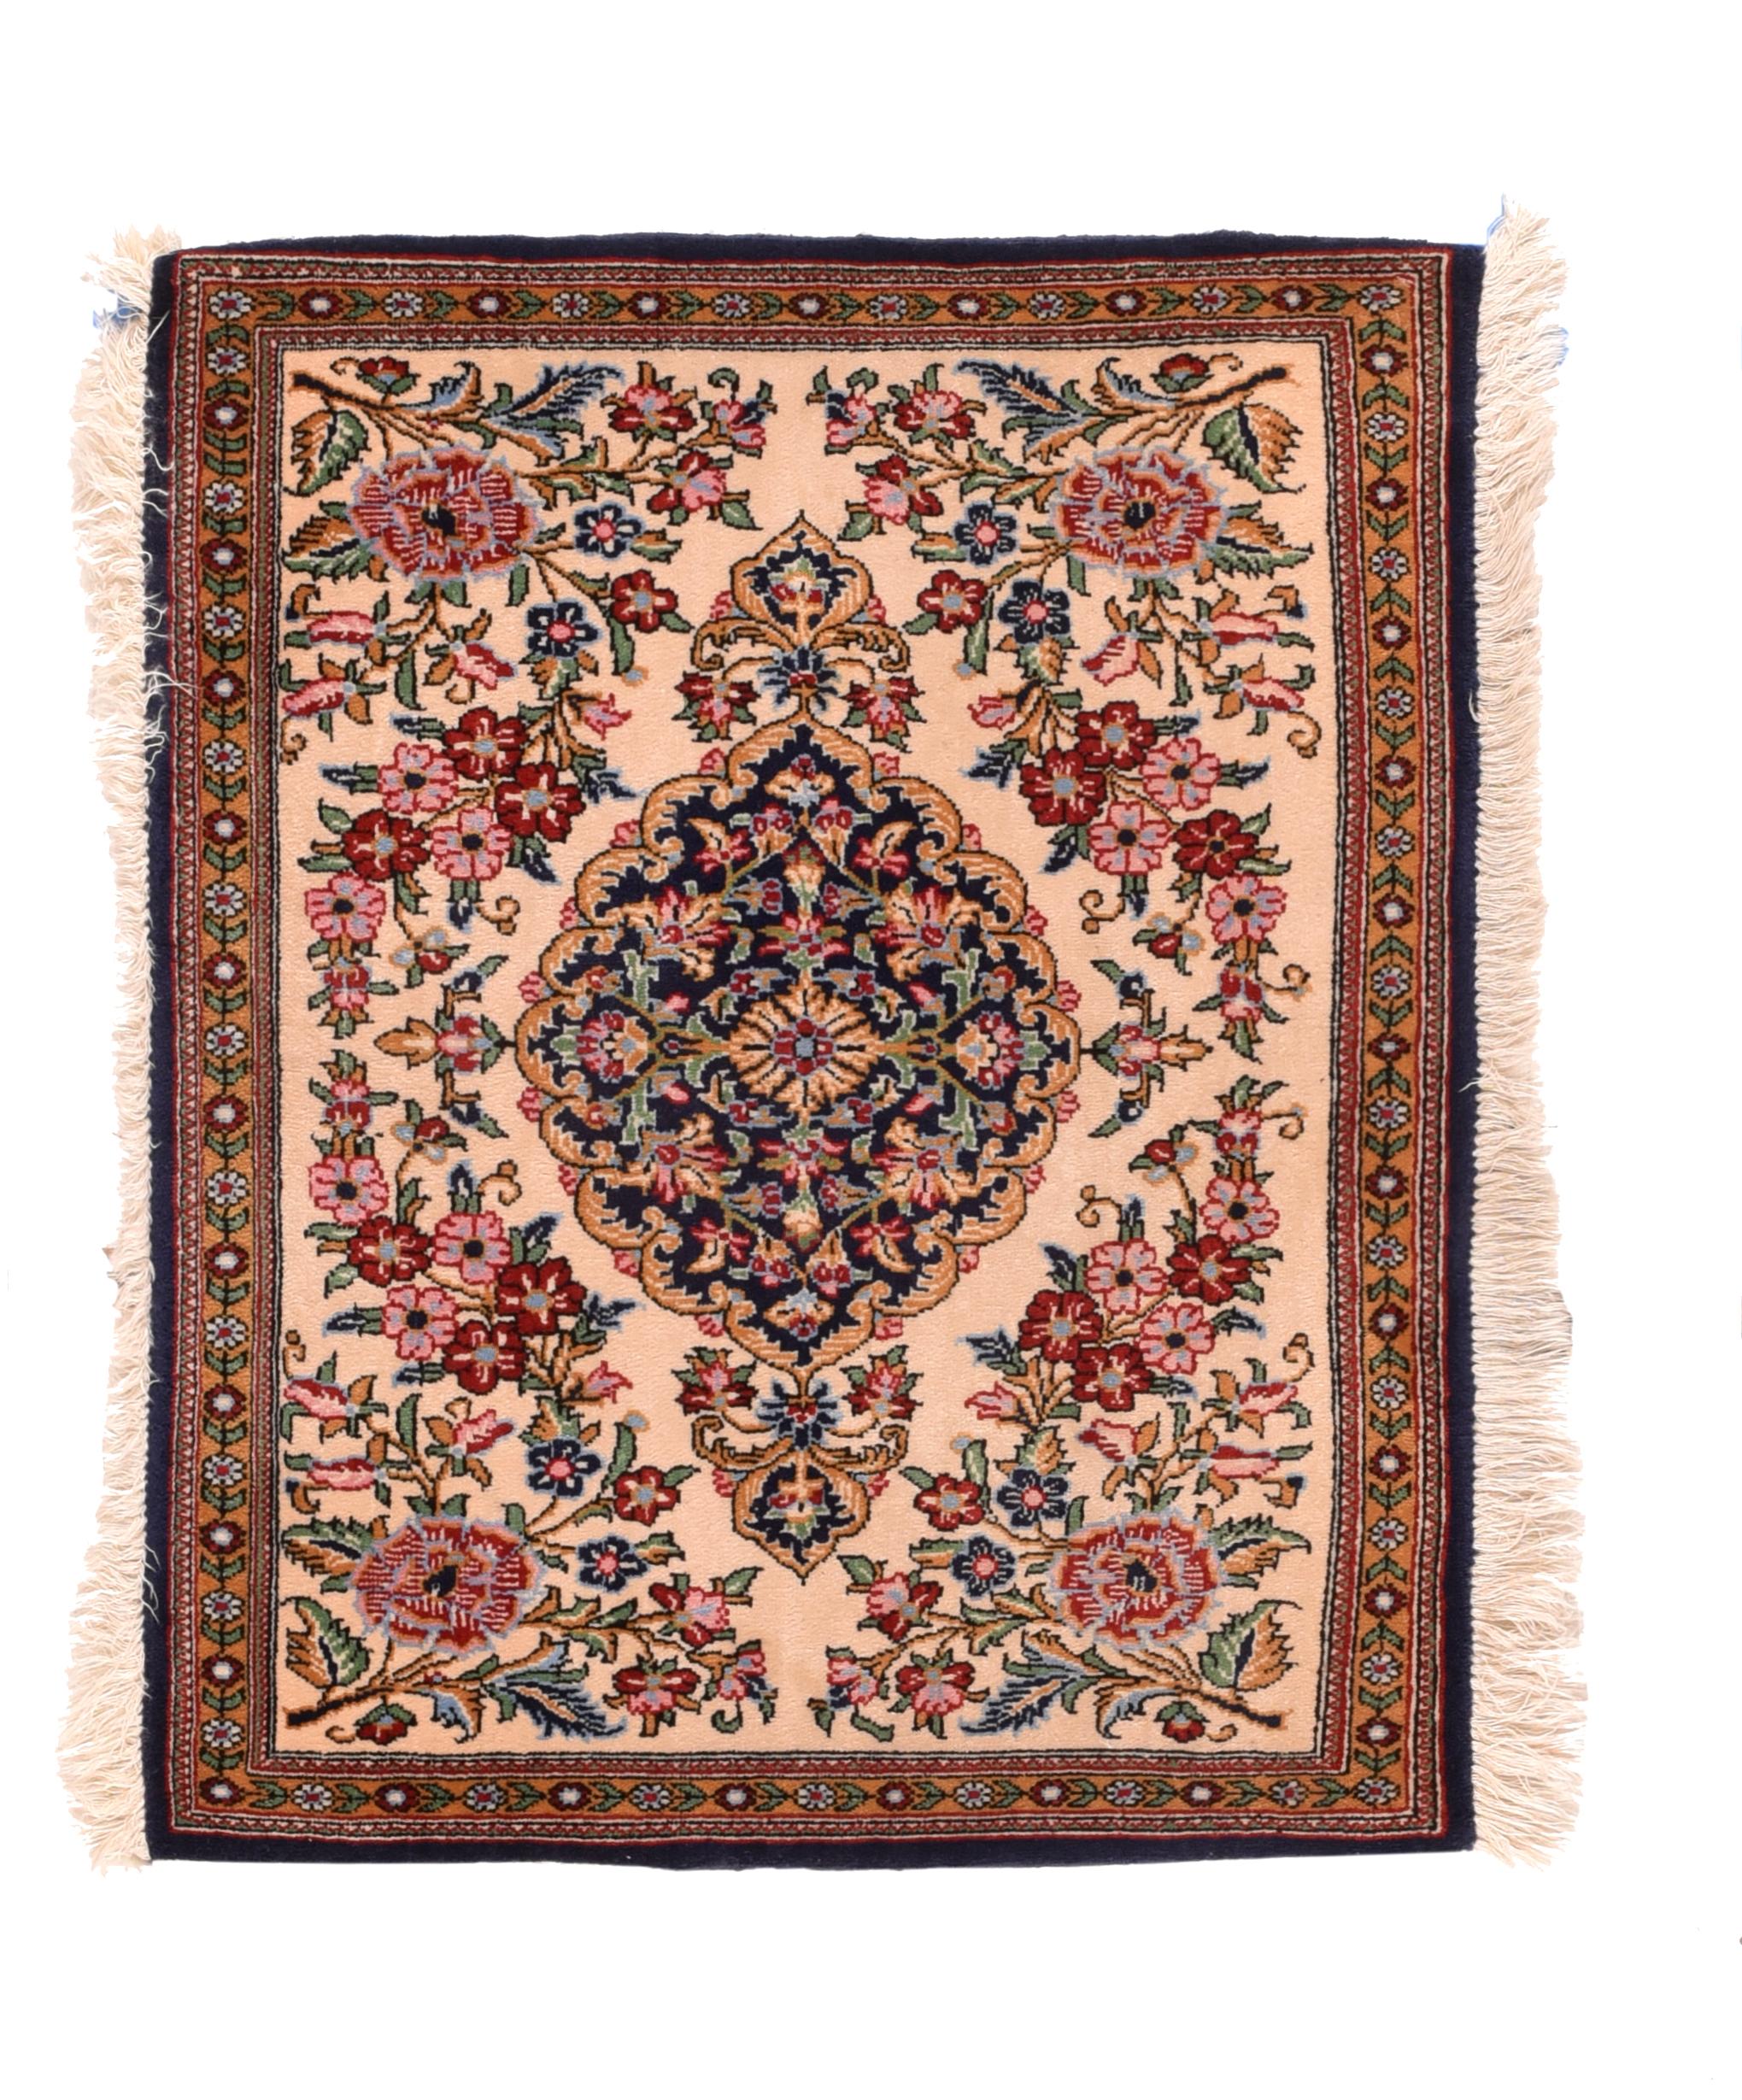 Vintage Qashqai Rug 2'1'' x 2'3'' In Good Condition For Sale In New York, NY